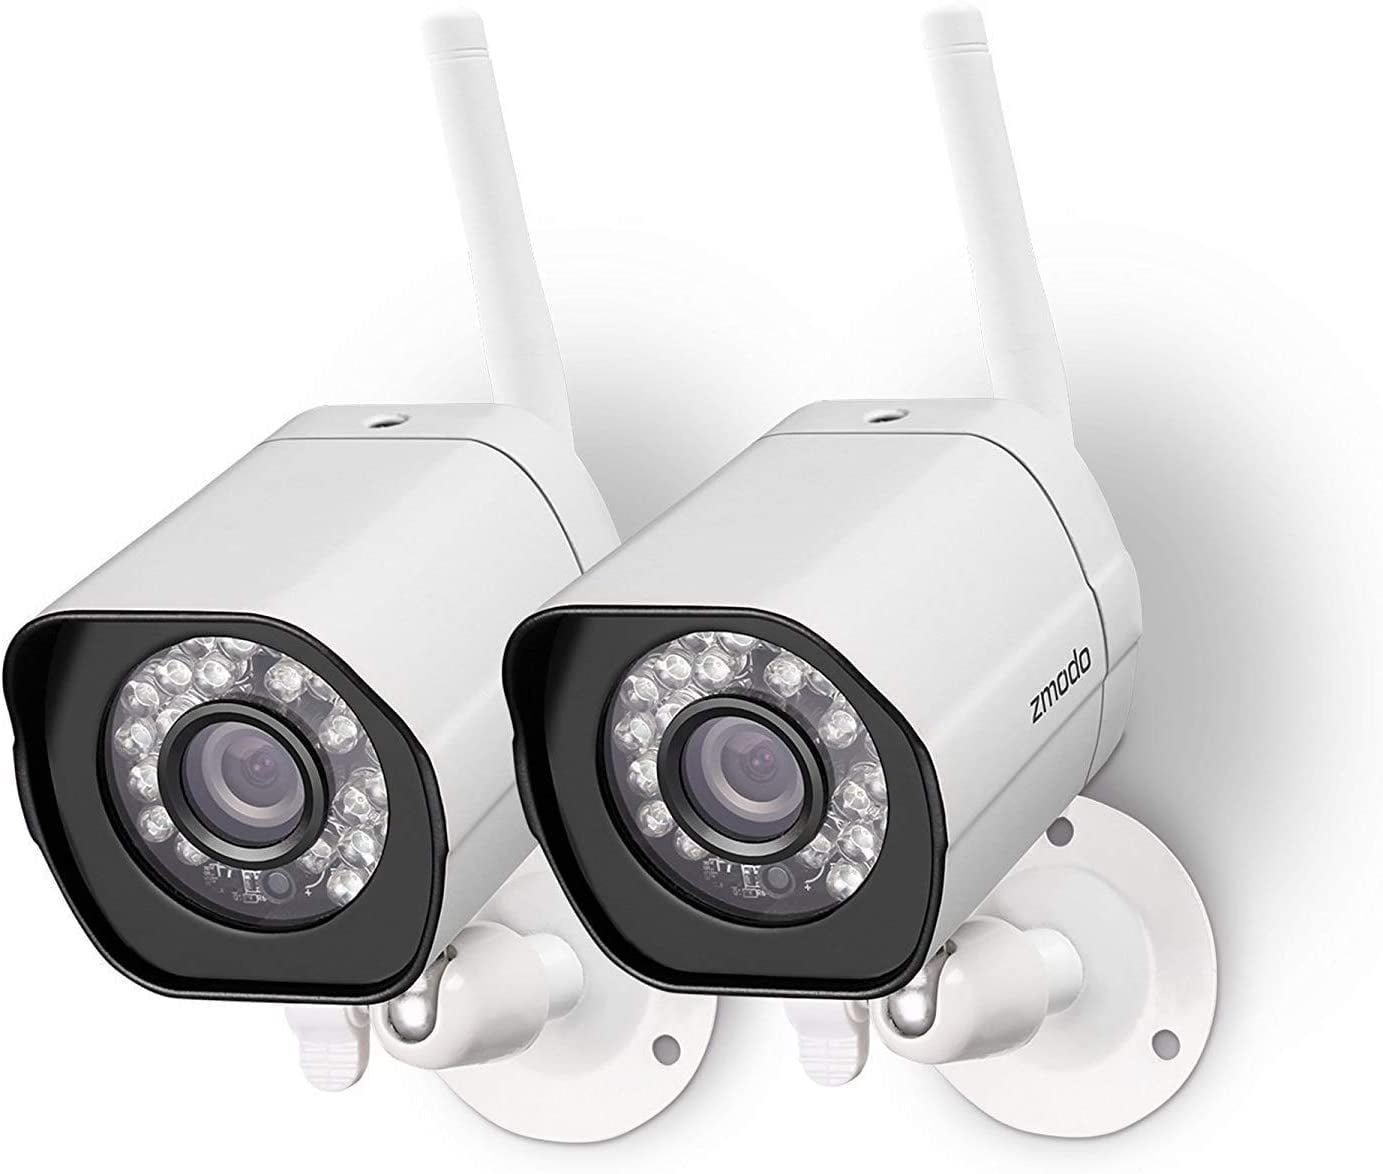 Zmodo 2 Pack Wireless Security Camera System Smart Outdoor WiFi IP